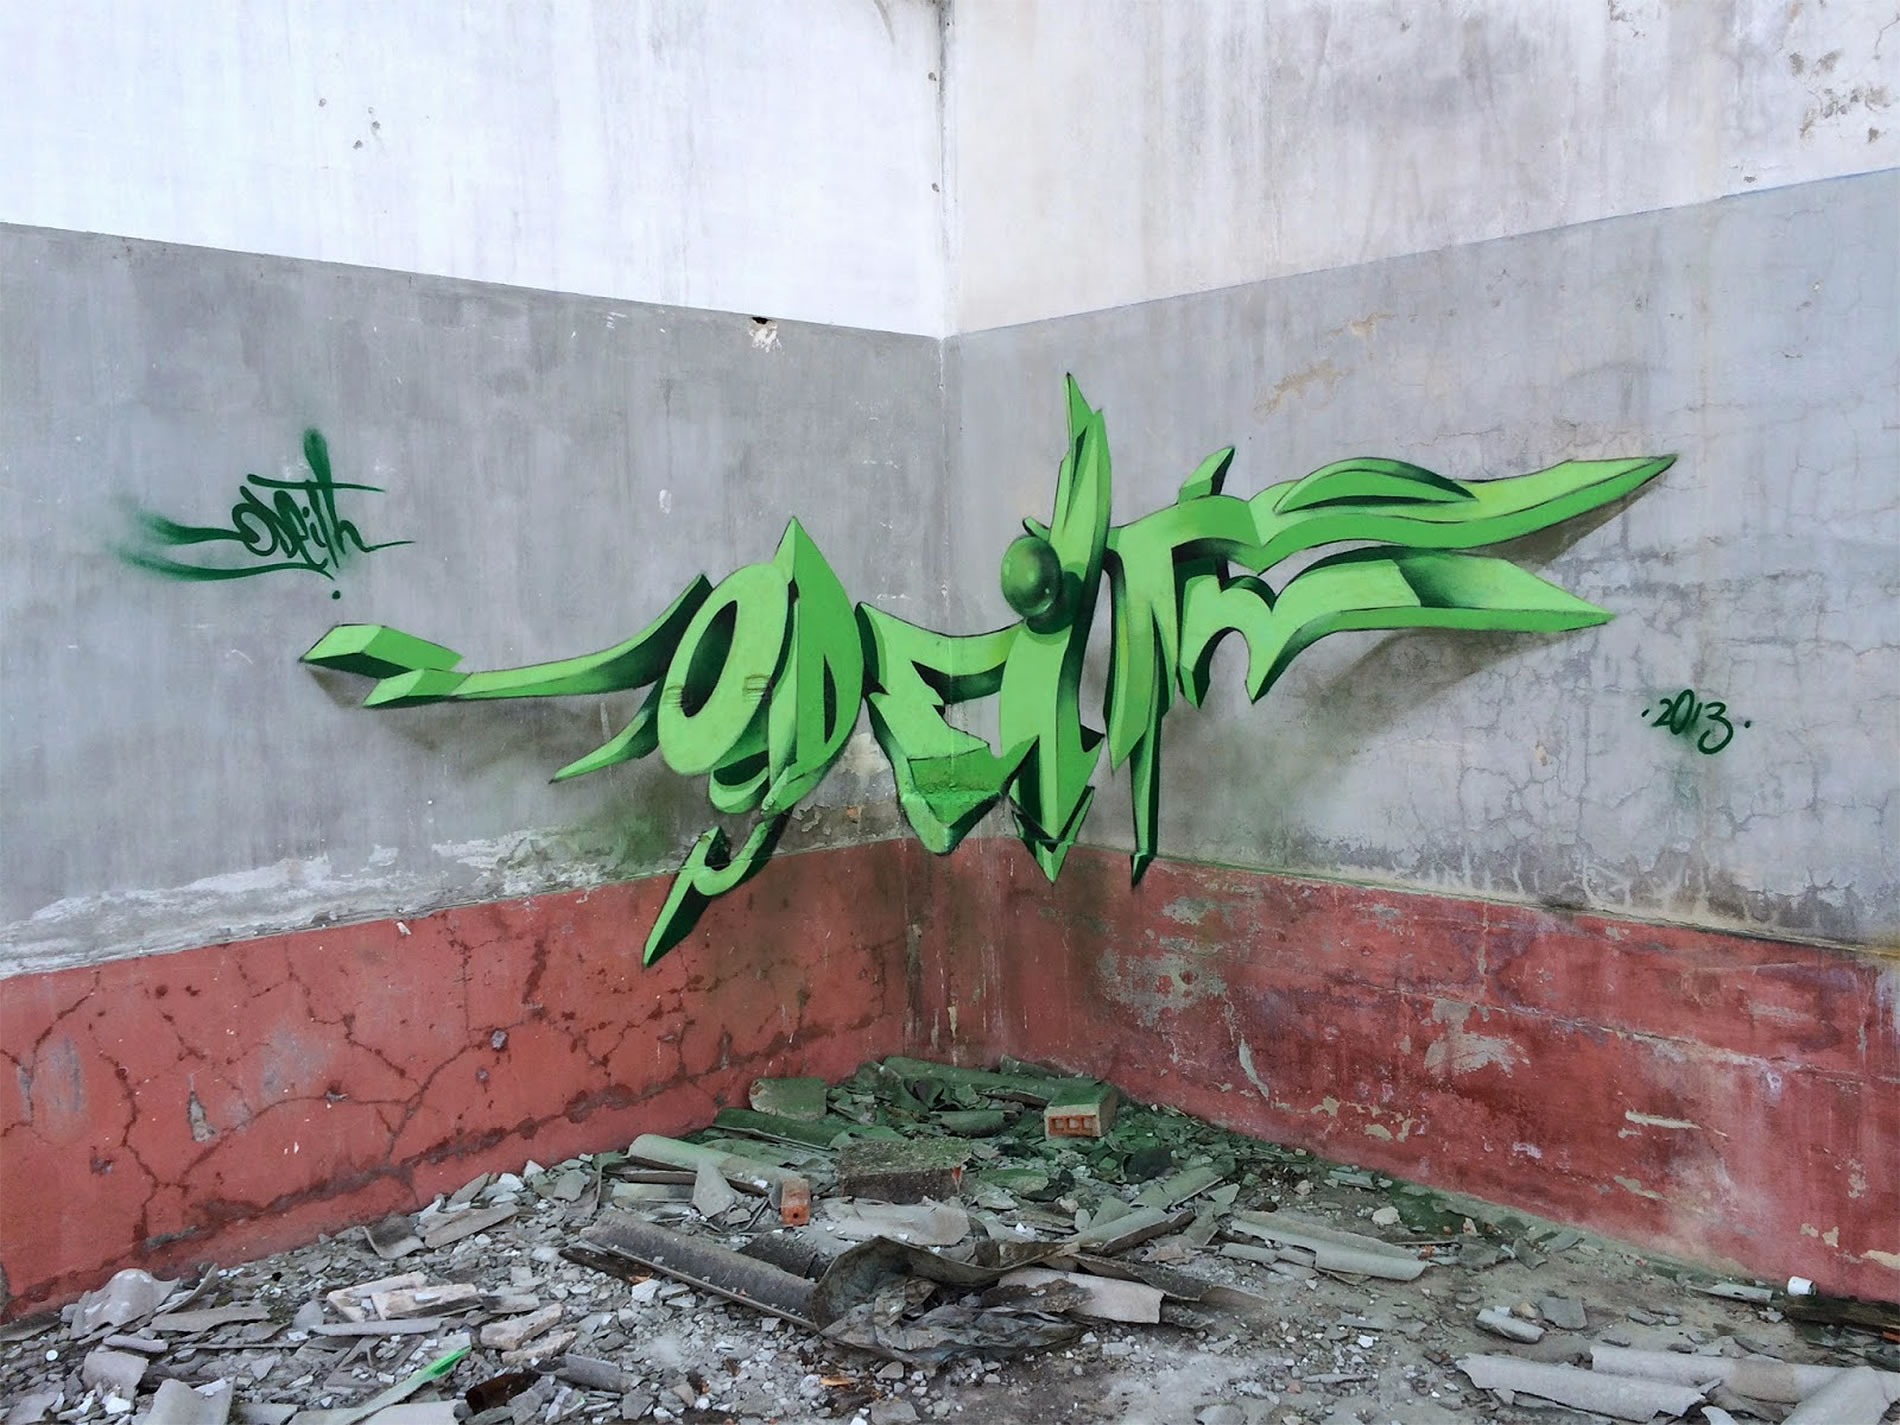 word odeith in 3d anamorphic graffit by odeith, portugal